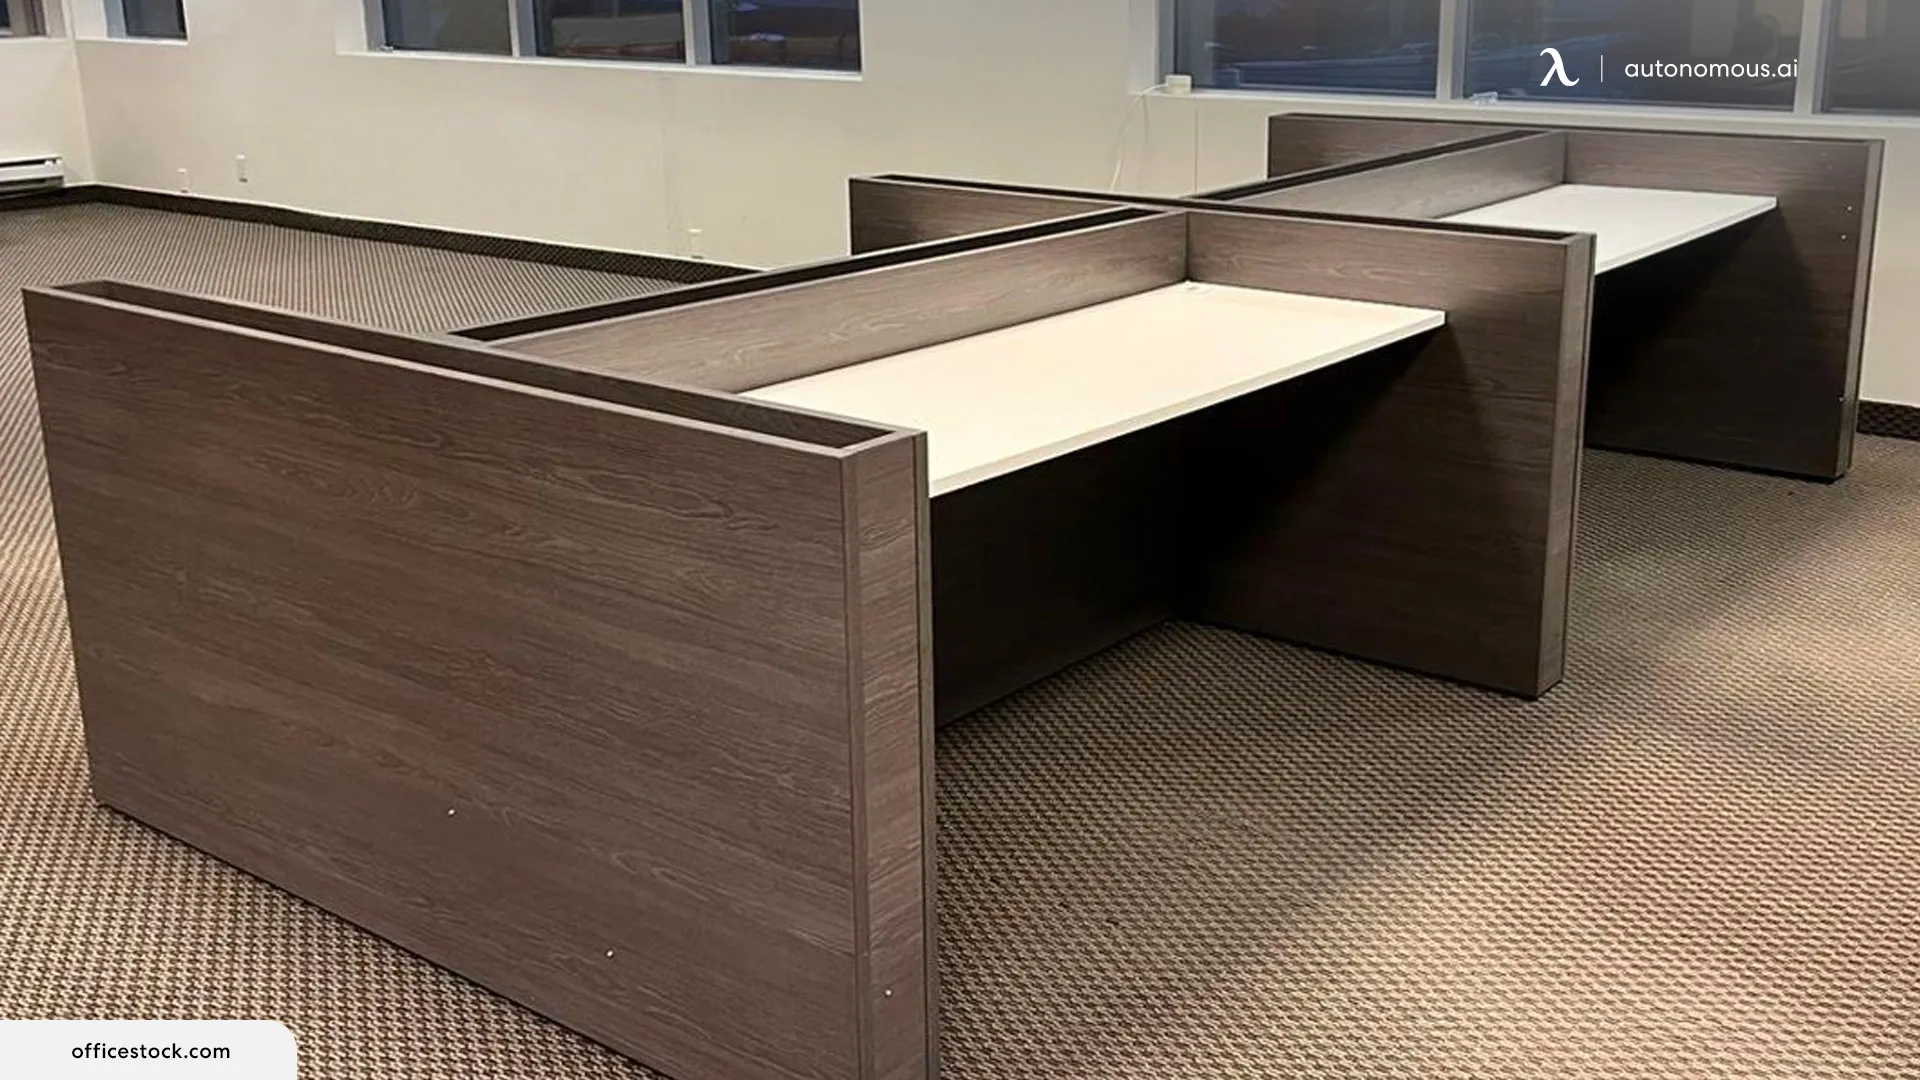 Office Stock – Wide Selection of Office Furniture